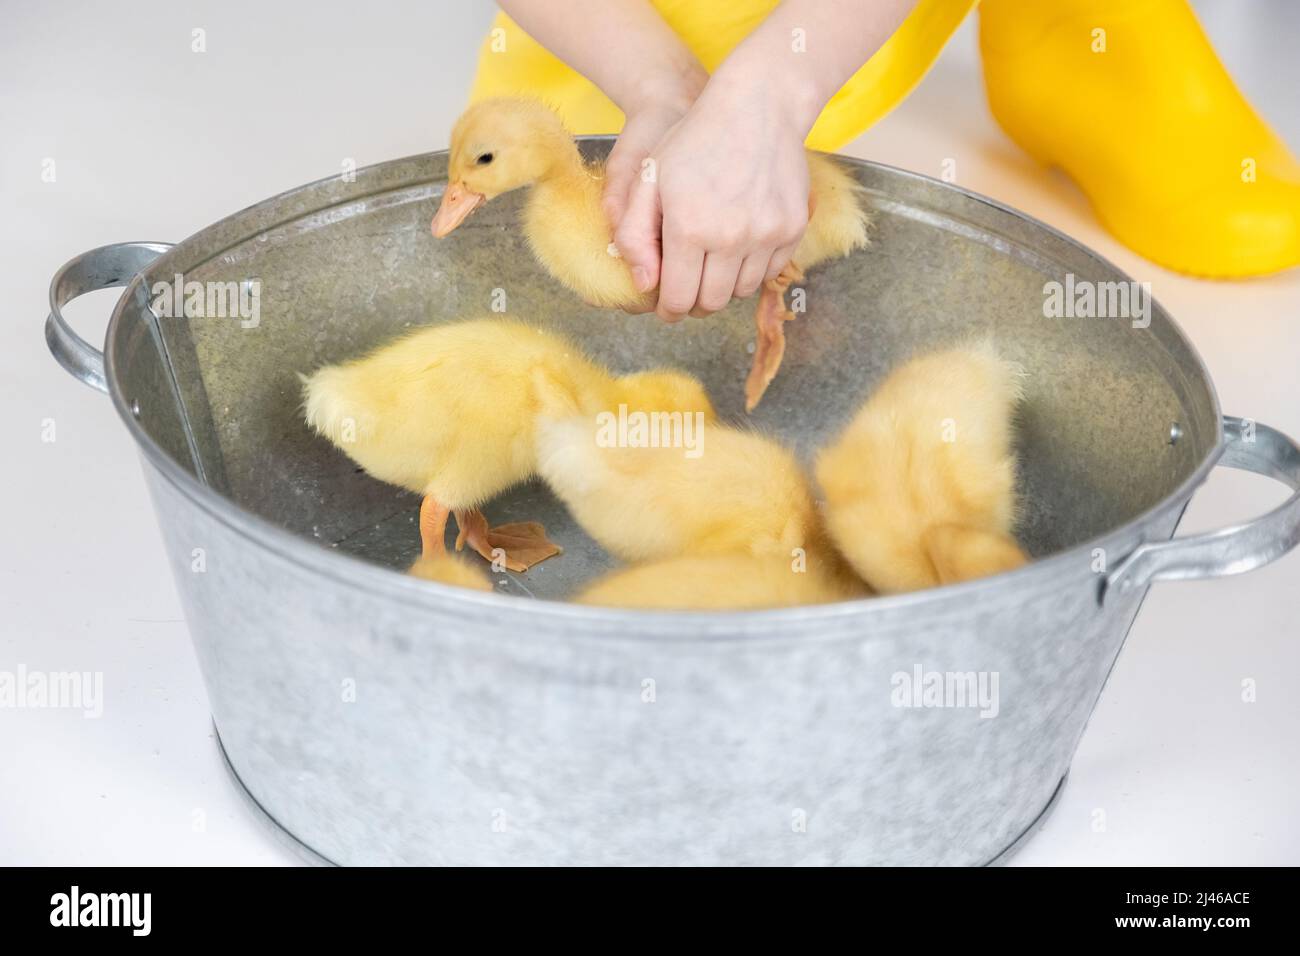 Small yellow fluffy ducklings in a metal bowl on a white background in studio Stock Photo